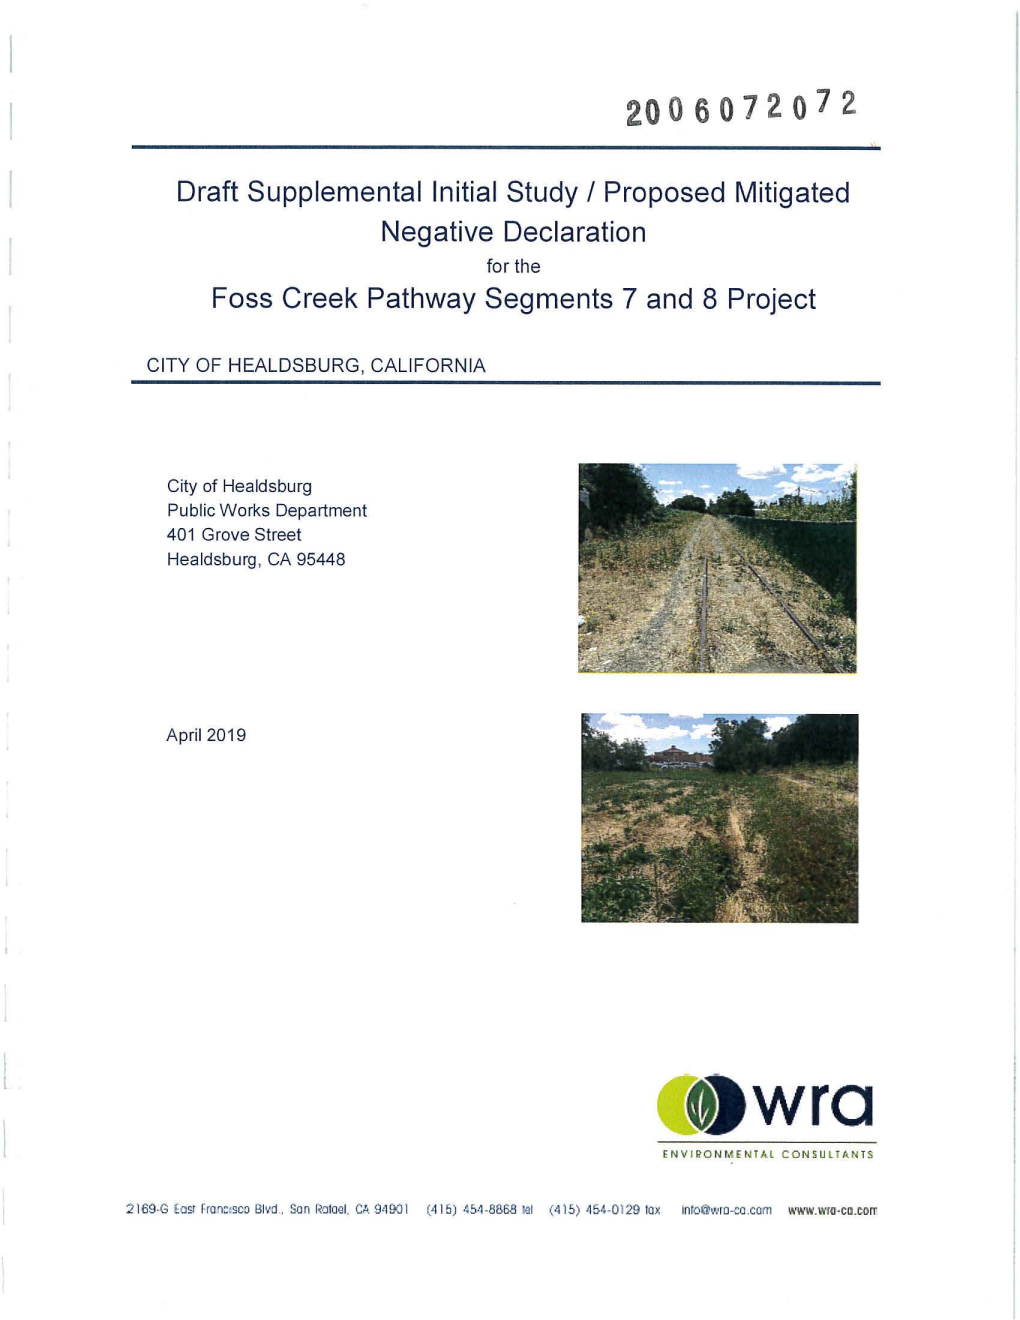 Draft Supplemental Initial Study / Proposed Mitigated Negative Declaration for the Foss Creek Pathway Segments 7 and 8 Project